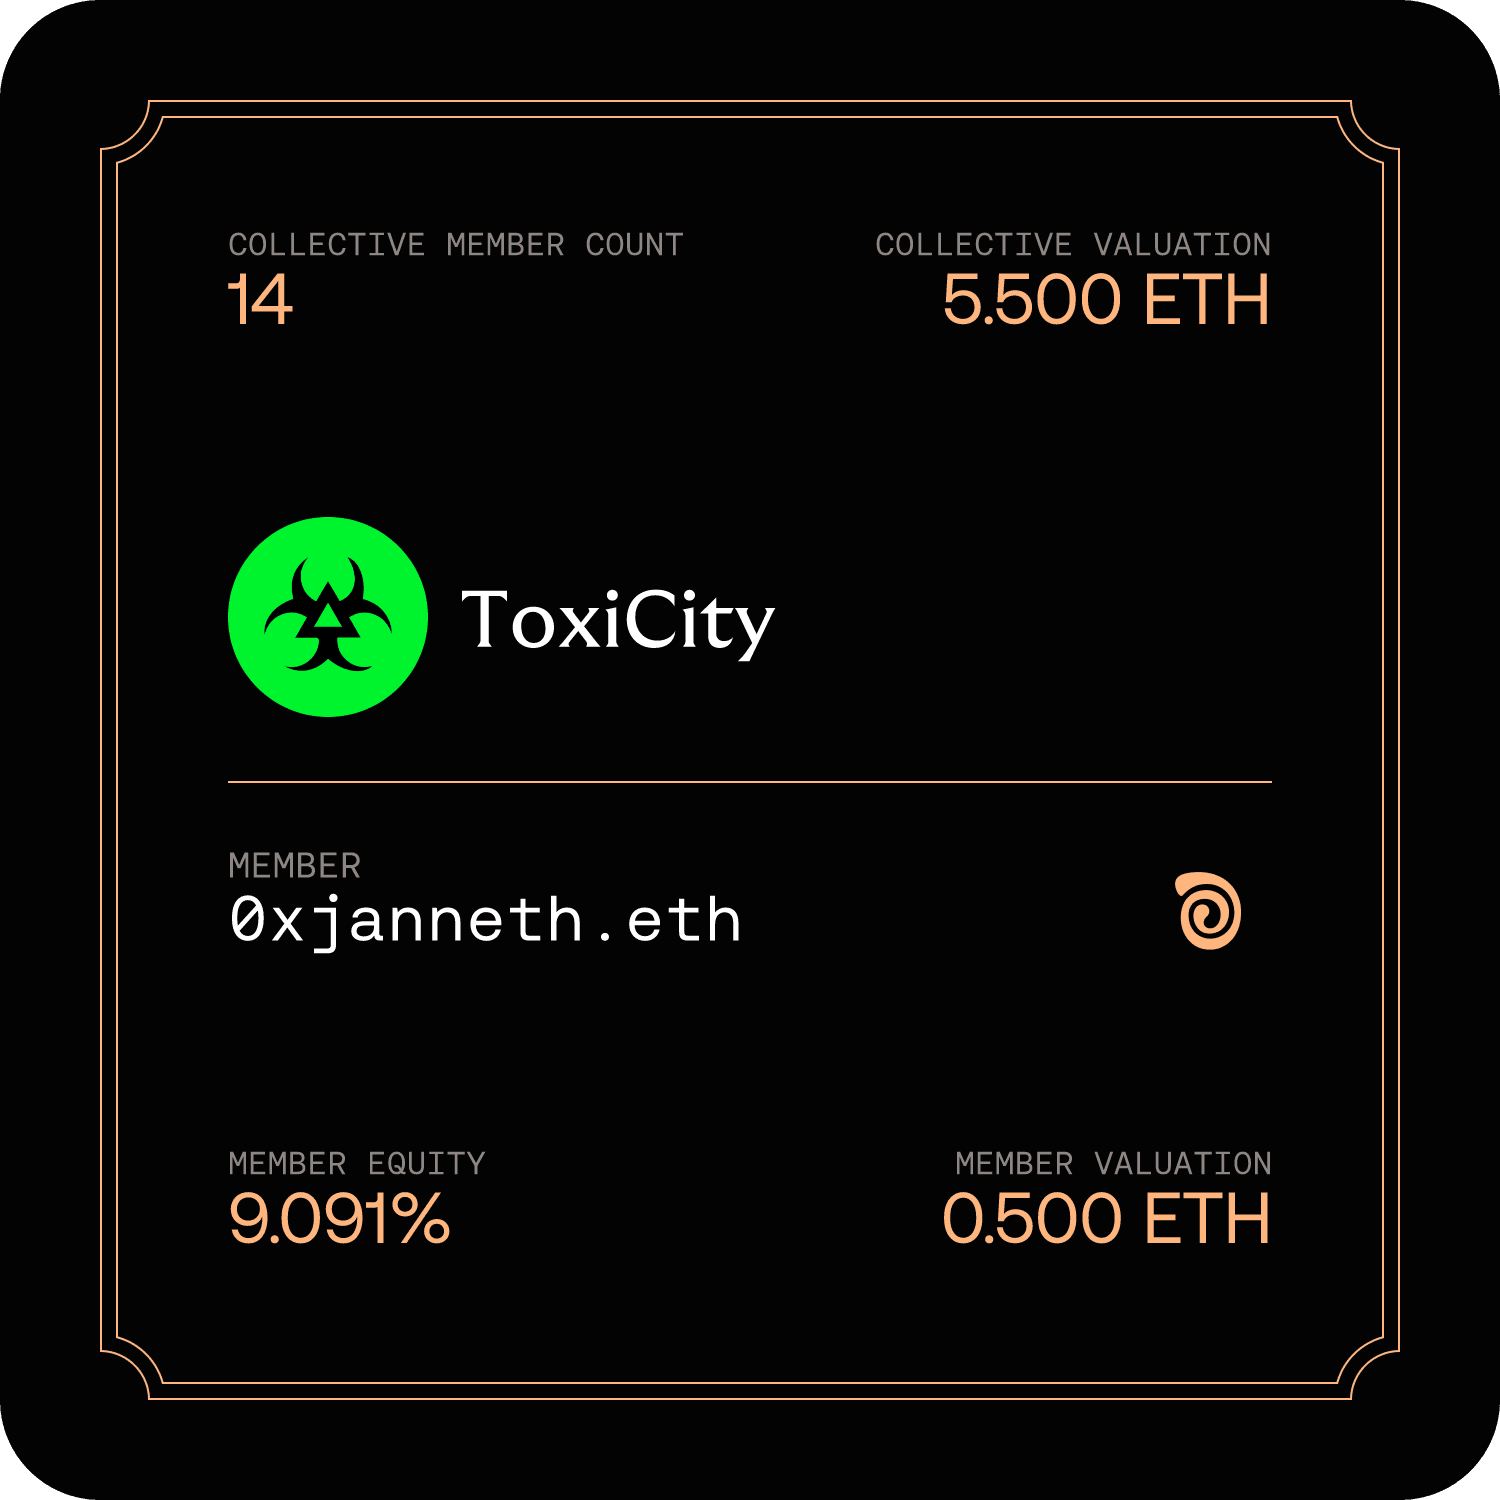 Membership Card for ToxiCity